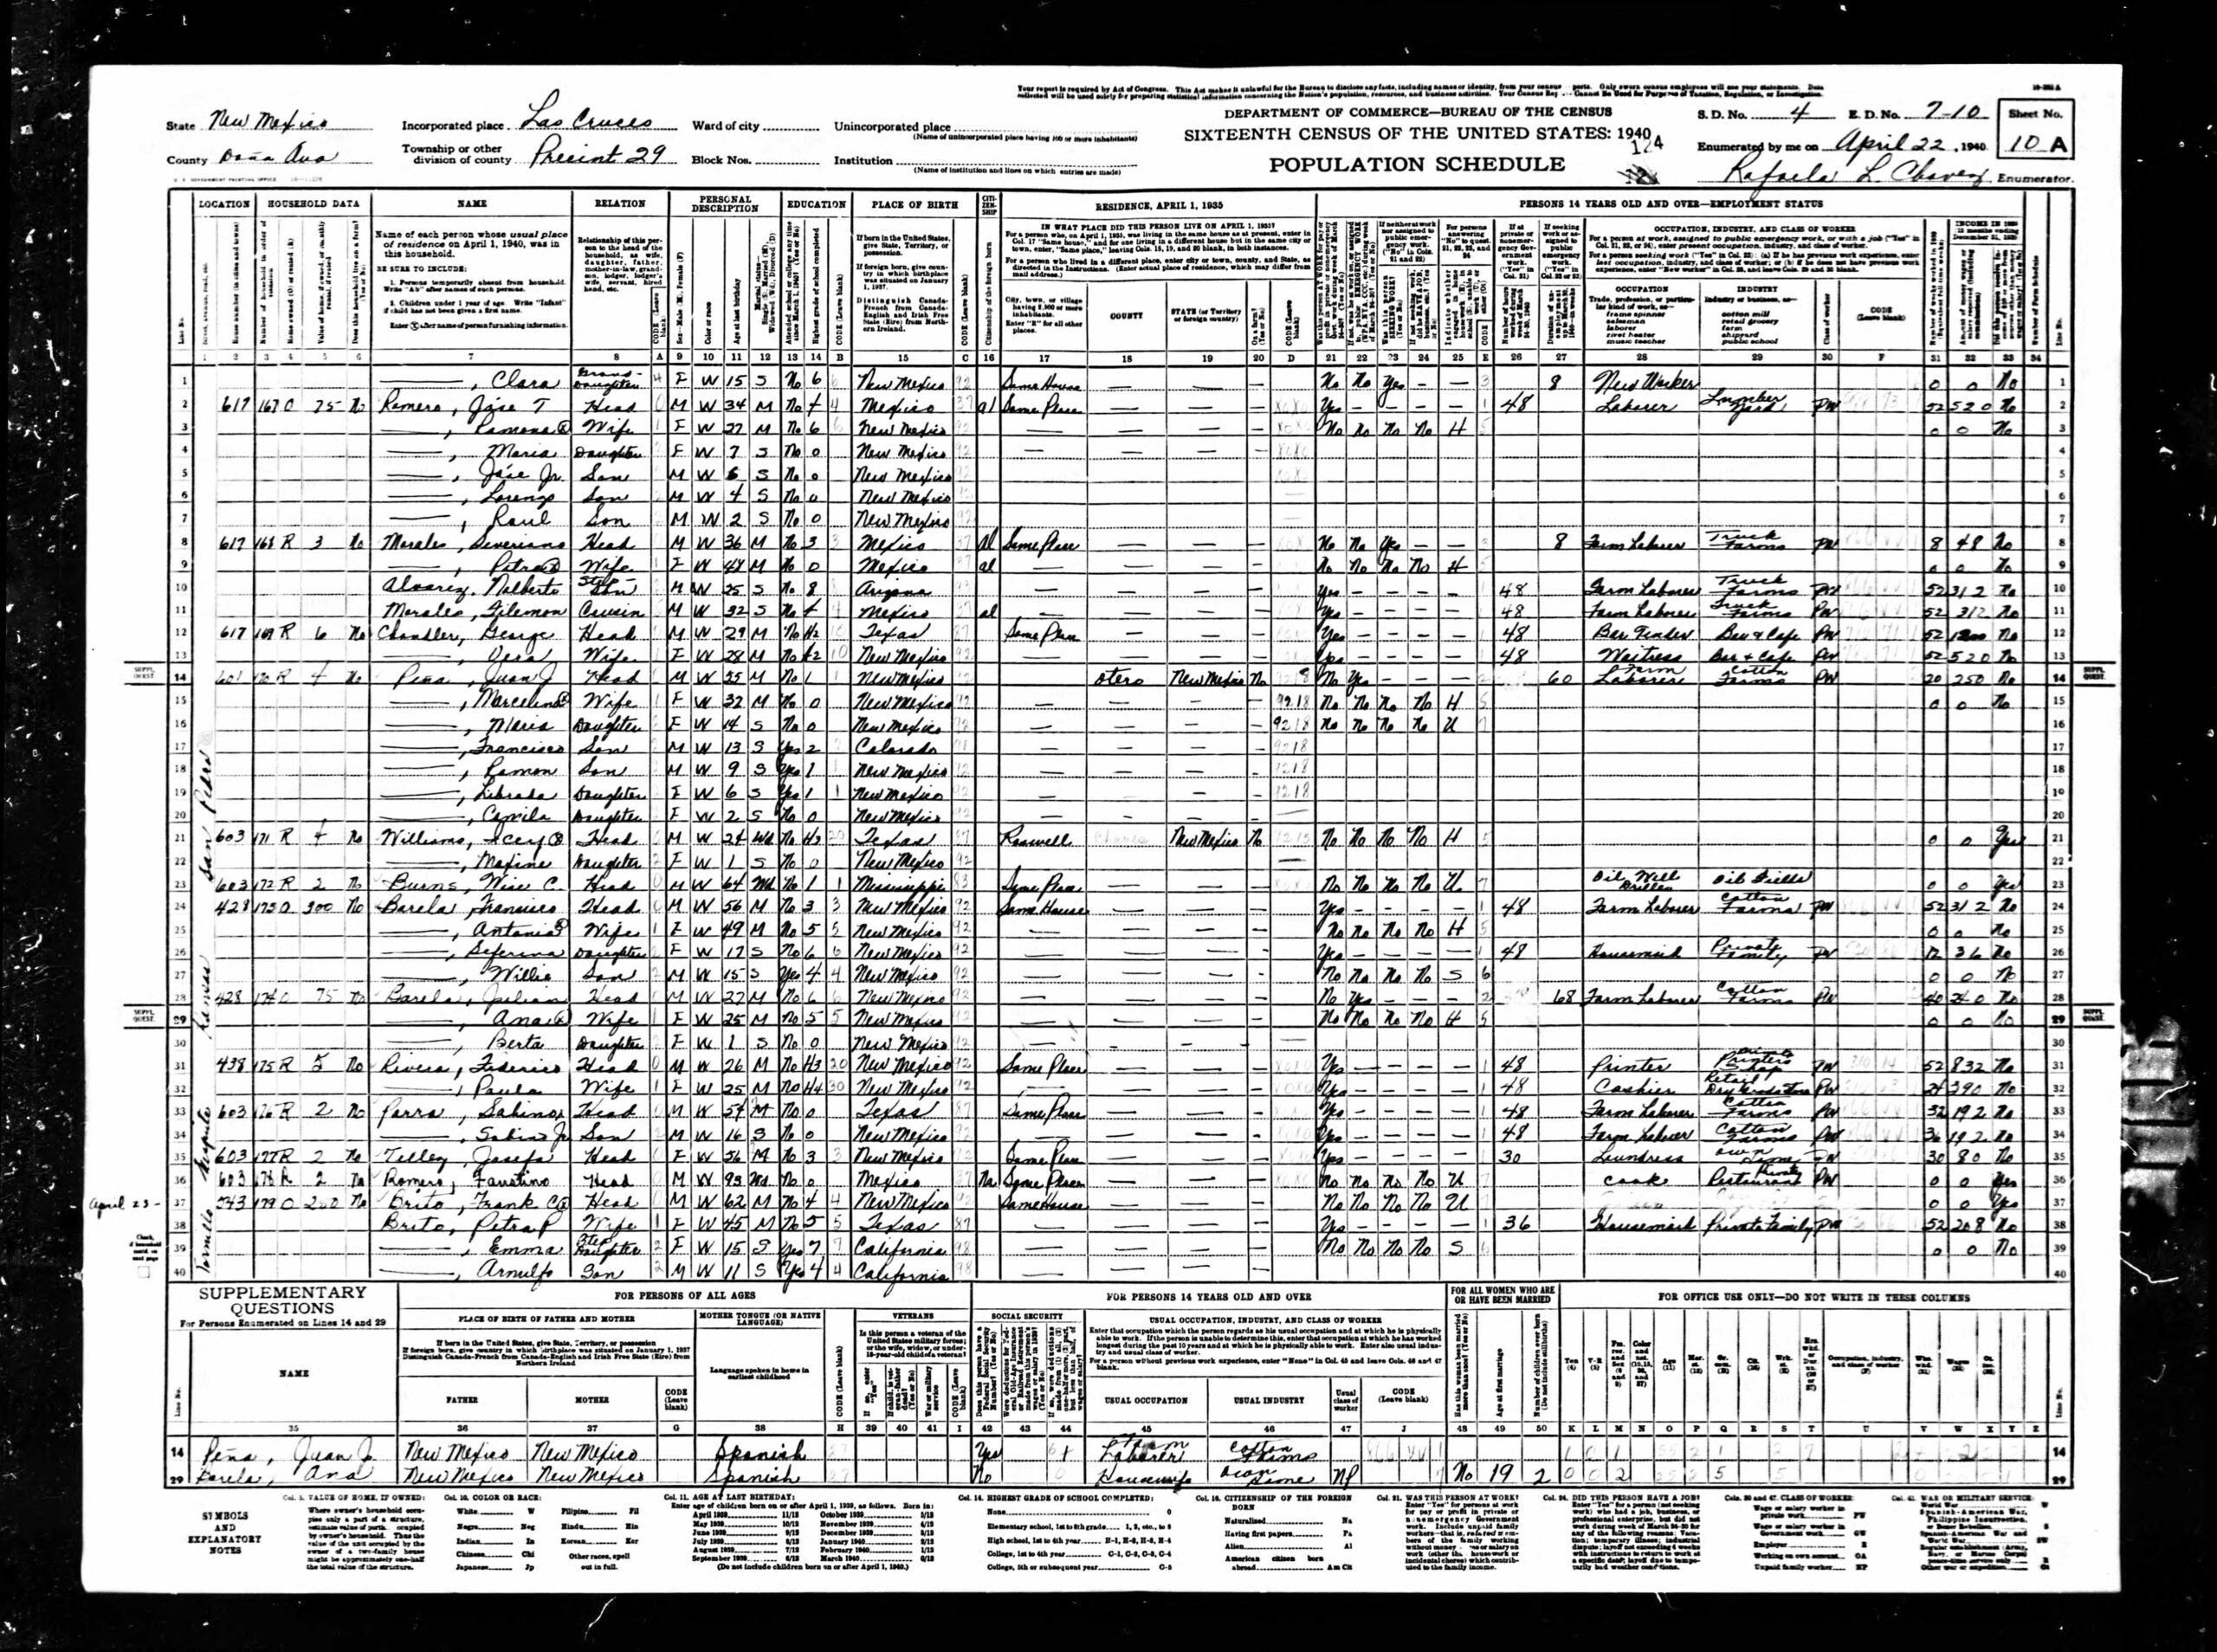 This snapshot of Frank C Brito's life was captured by the 1940 U.S. Census.Frank C Brito was born about 1878. In 1940, he was 62 years old and lived in Las Cruces, New Mexico, with his wife, Petra, son, and daughter.